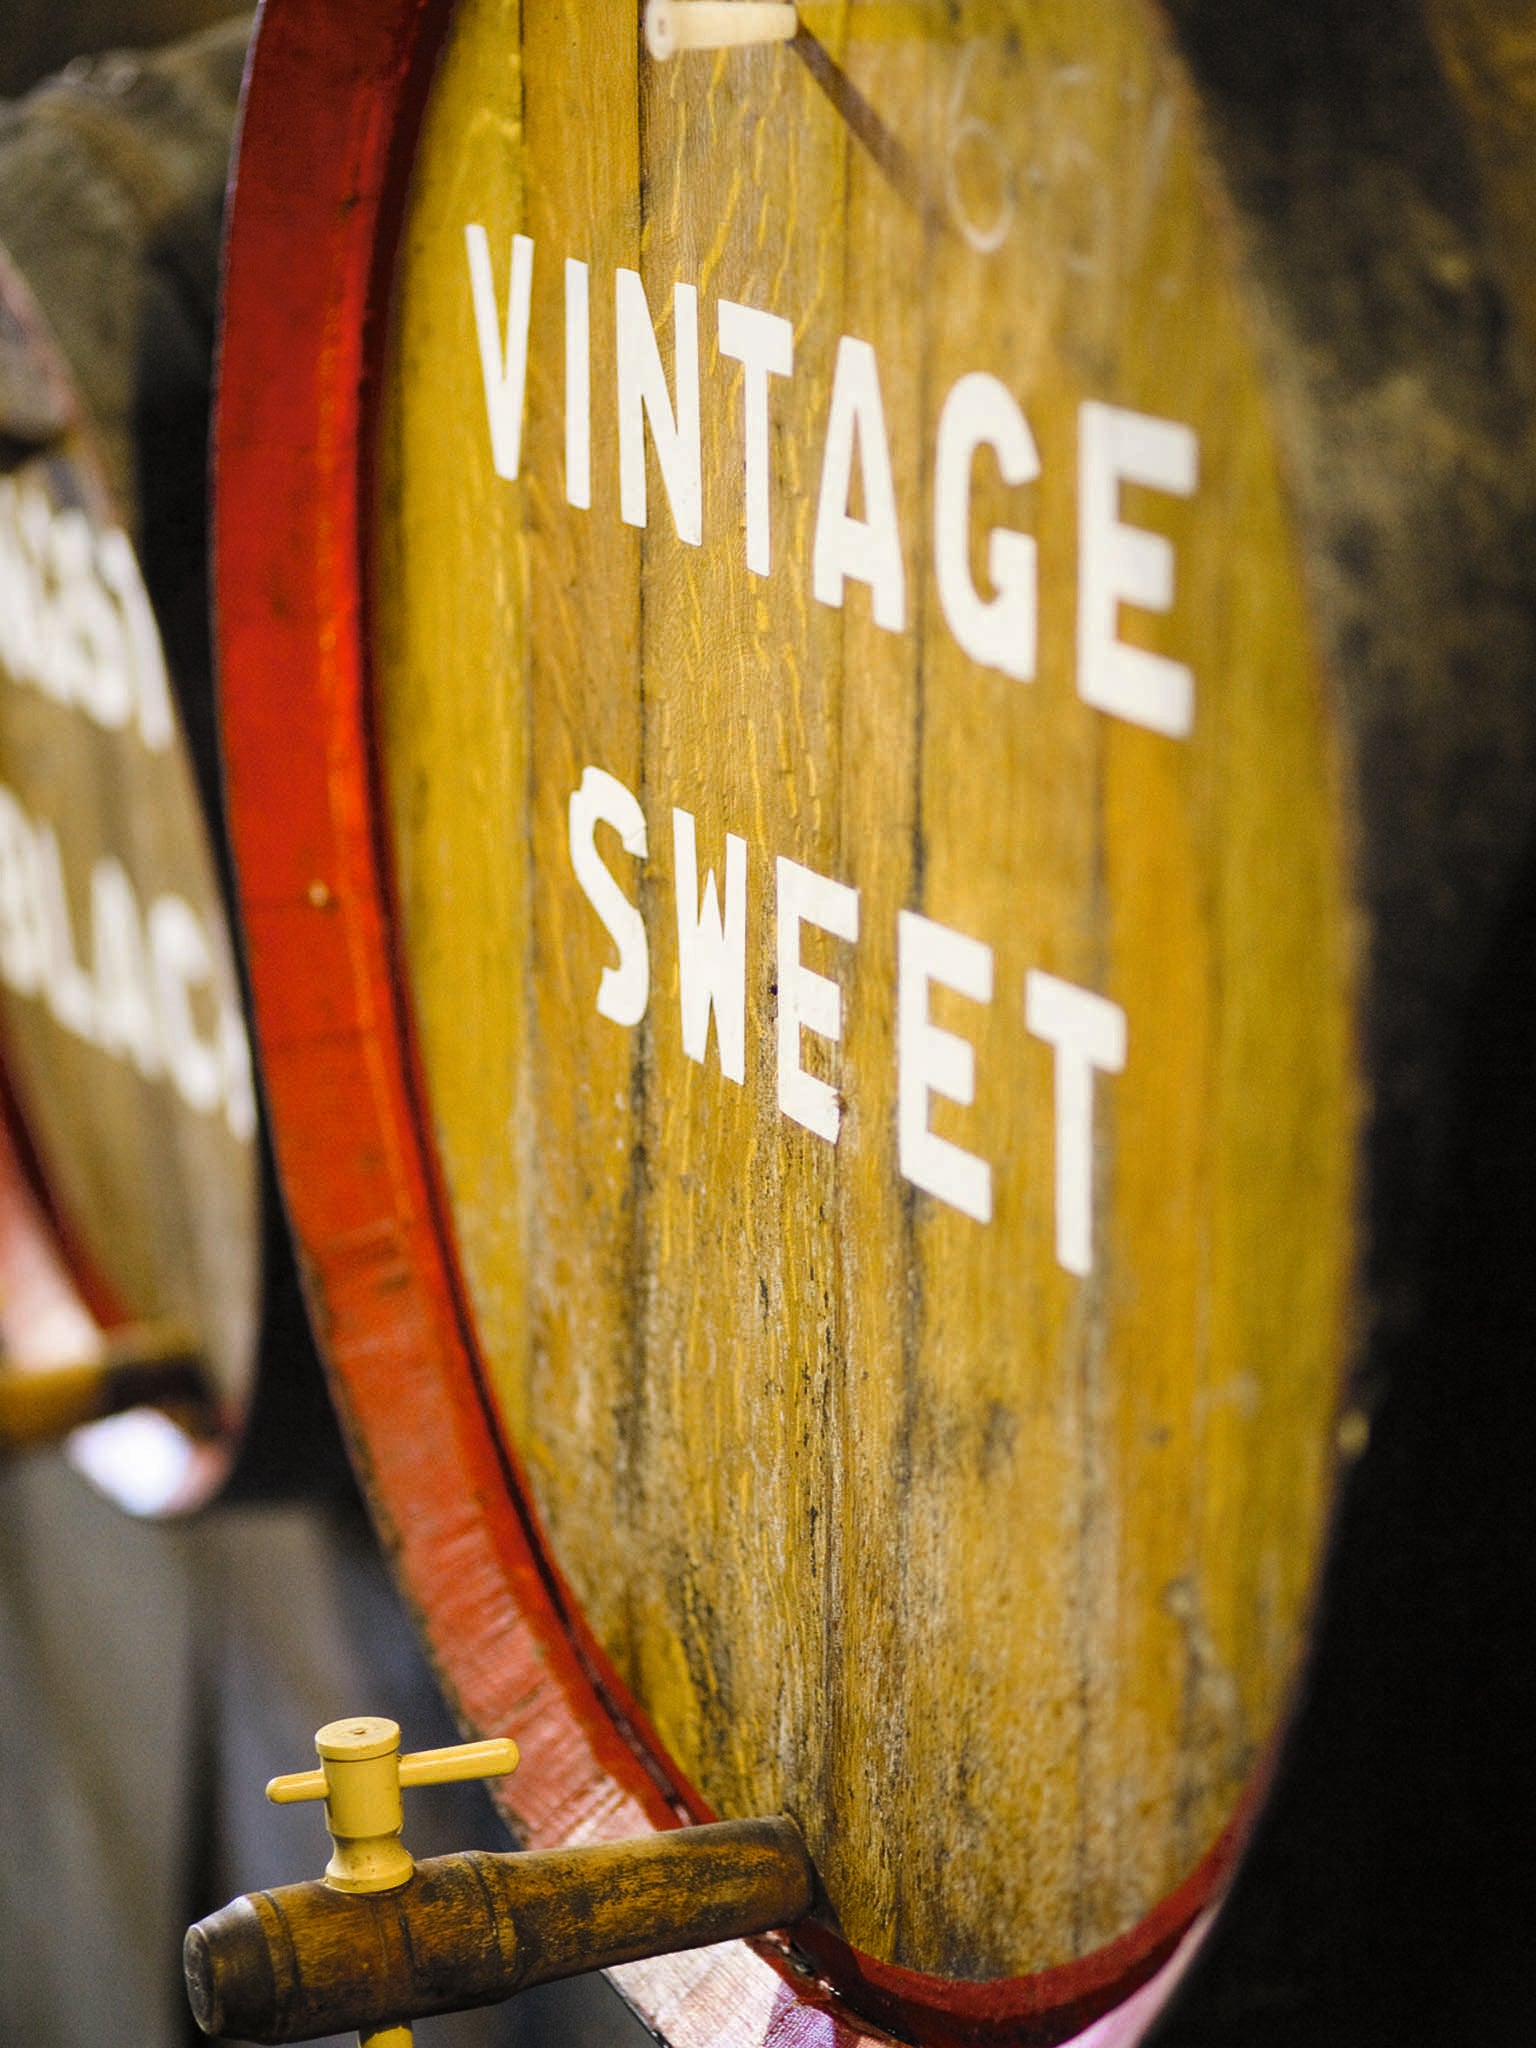 Vintage cider is a descriptor entirely based on enjoyment, rather than on anything you can actually measure